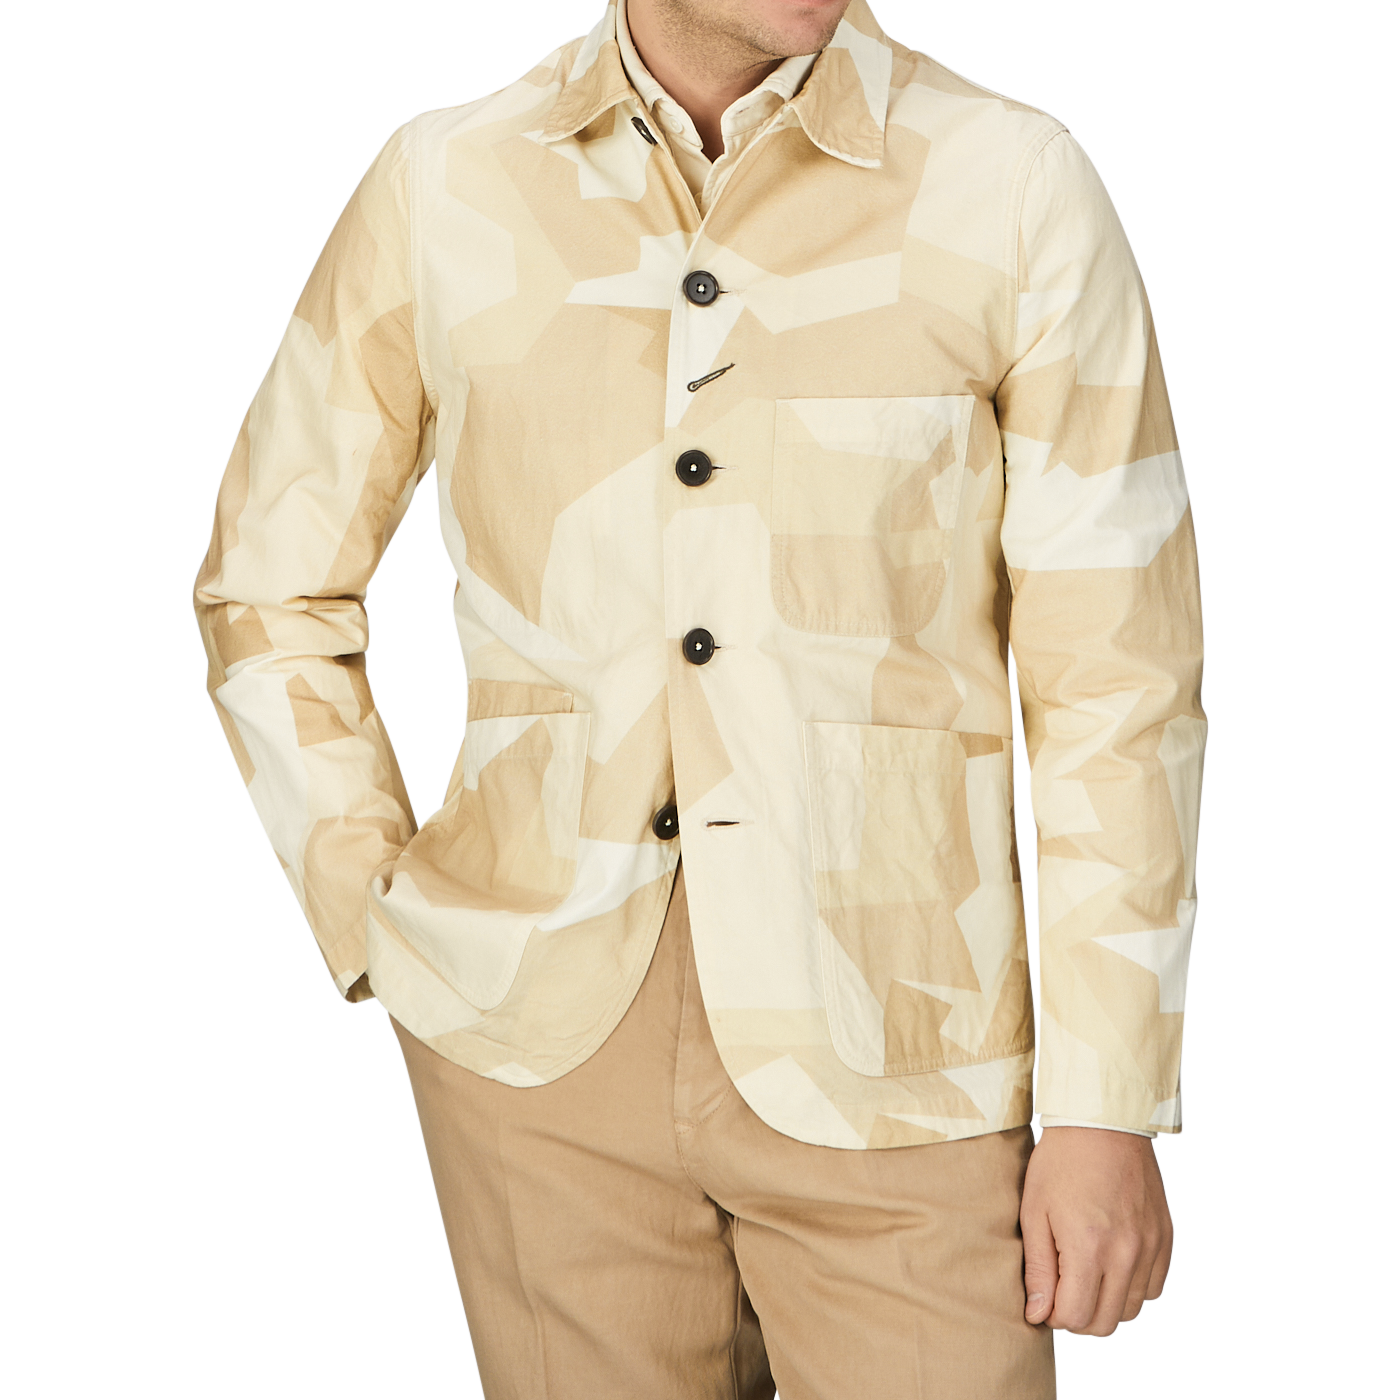 A man wearing a sand beige camo cotton Universal Works bakers jacket and tan pants.